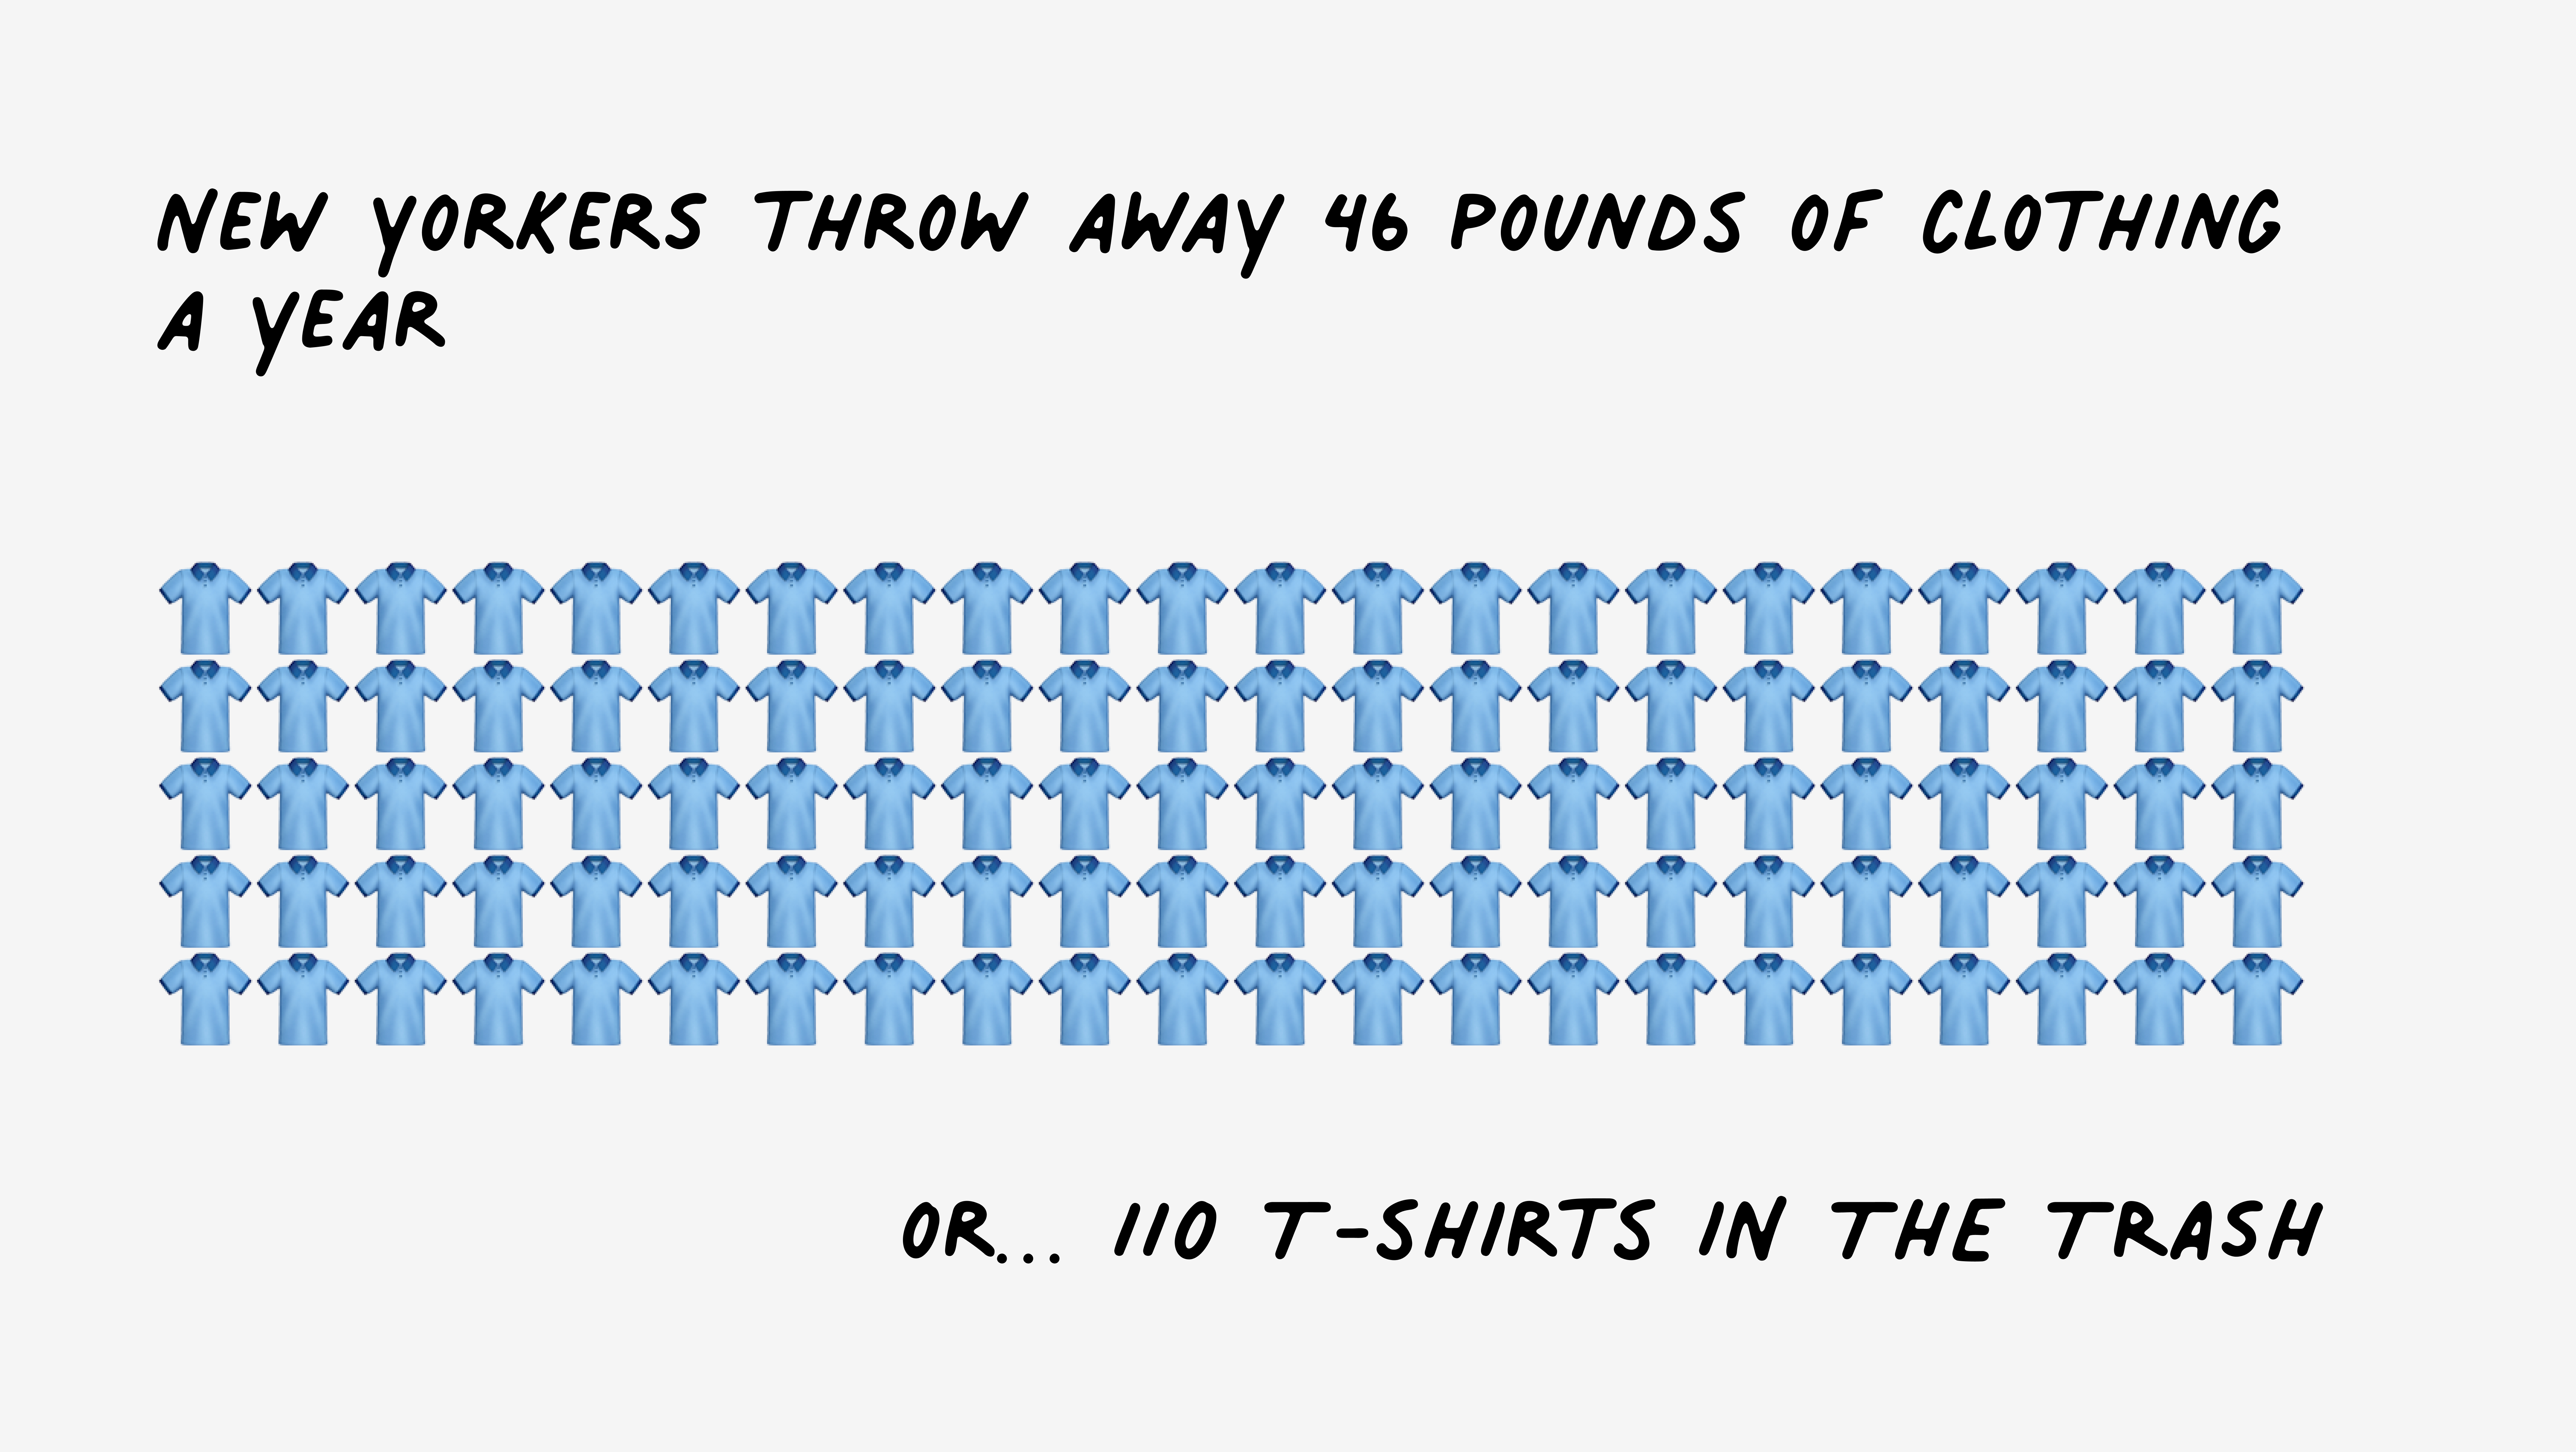 Graphic representing 110 t-shirts